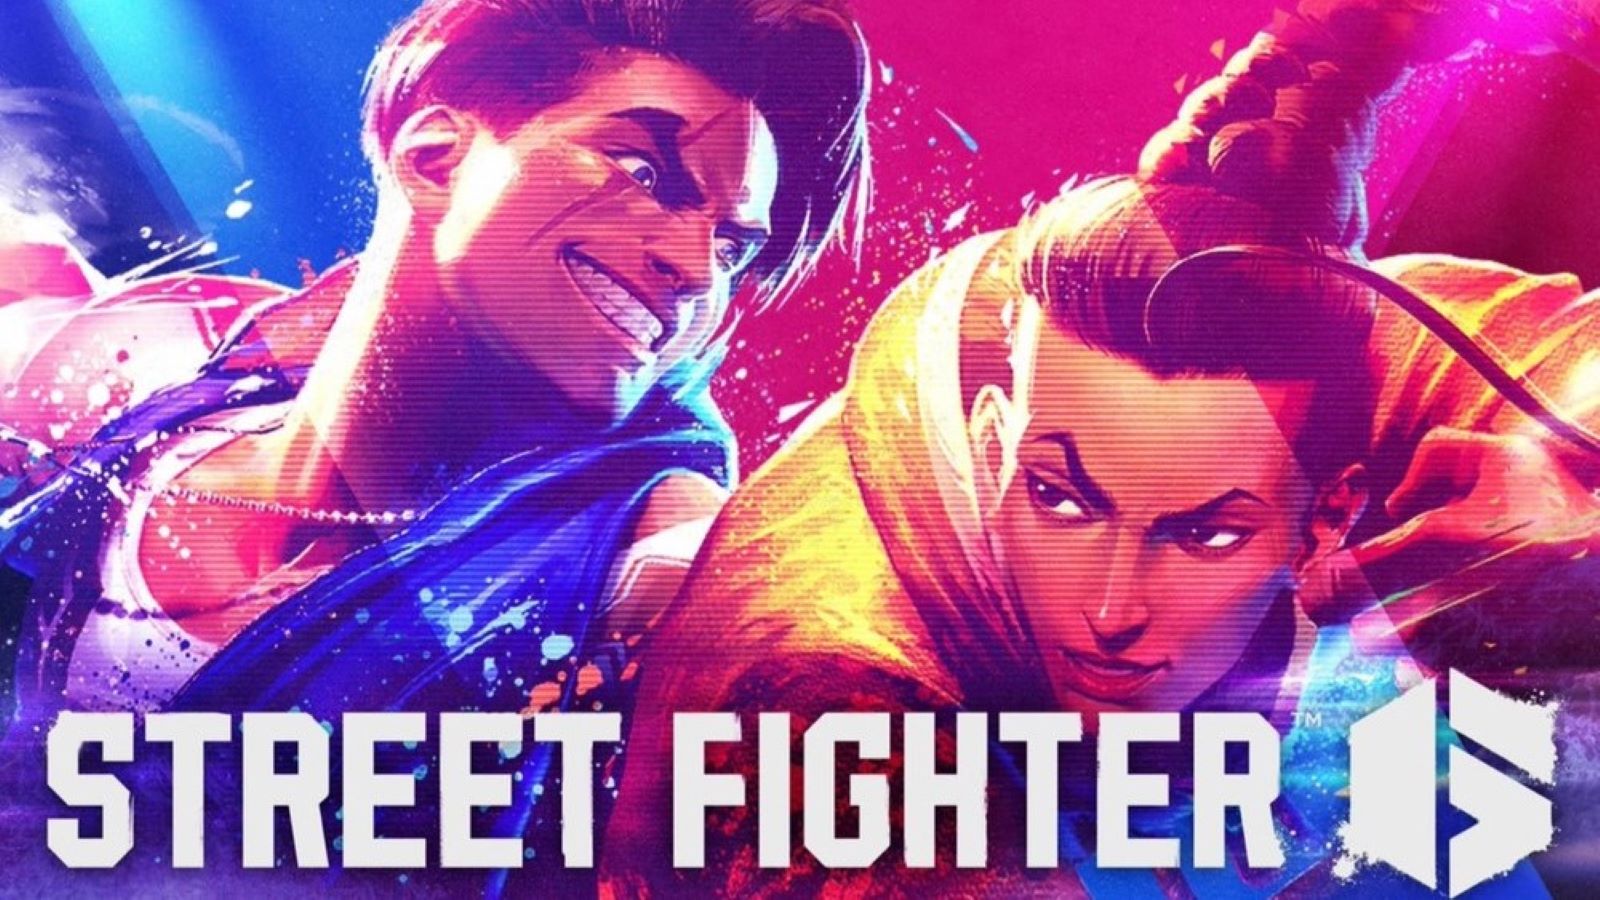 This Artist Reimagines DBZ Characters As Street Fighter Characters